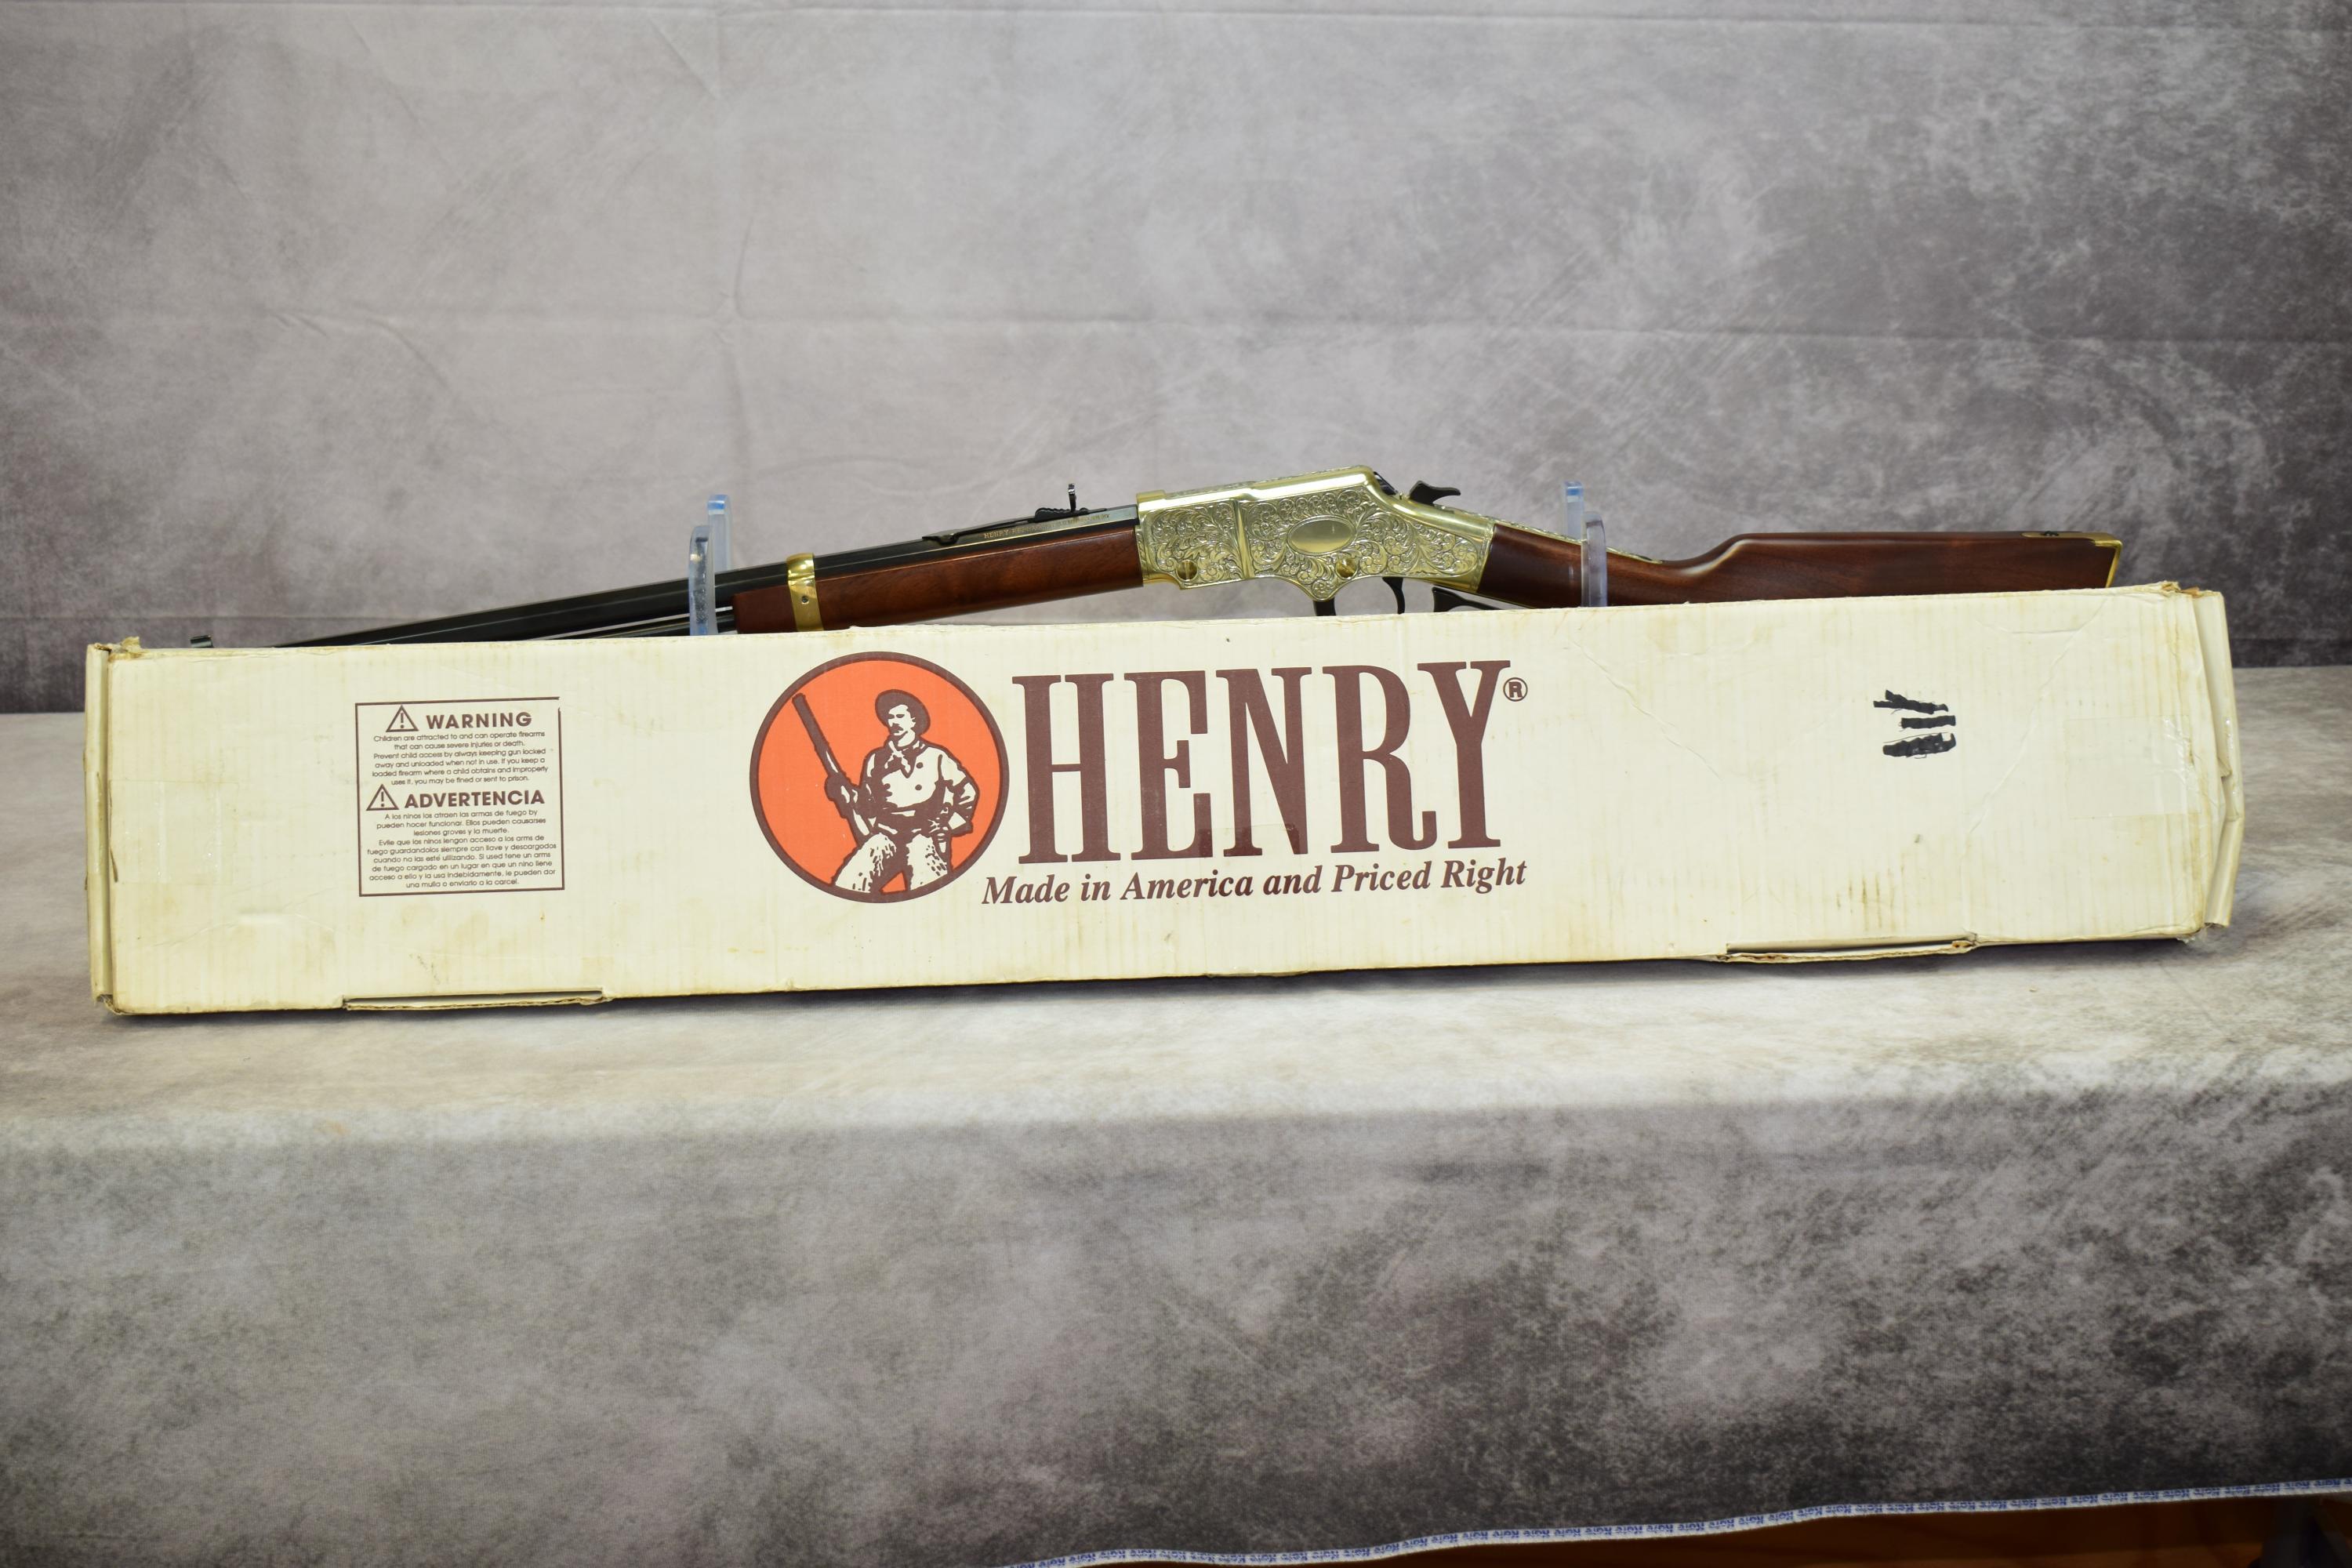 Henry  Mod H004MDD Deluxe  Cal .22 Mag.